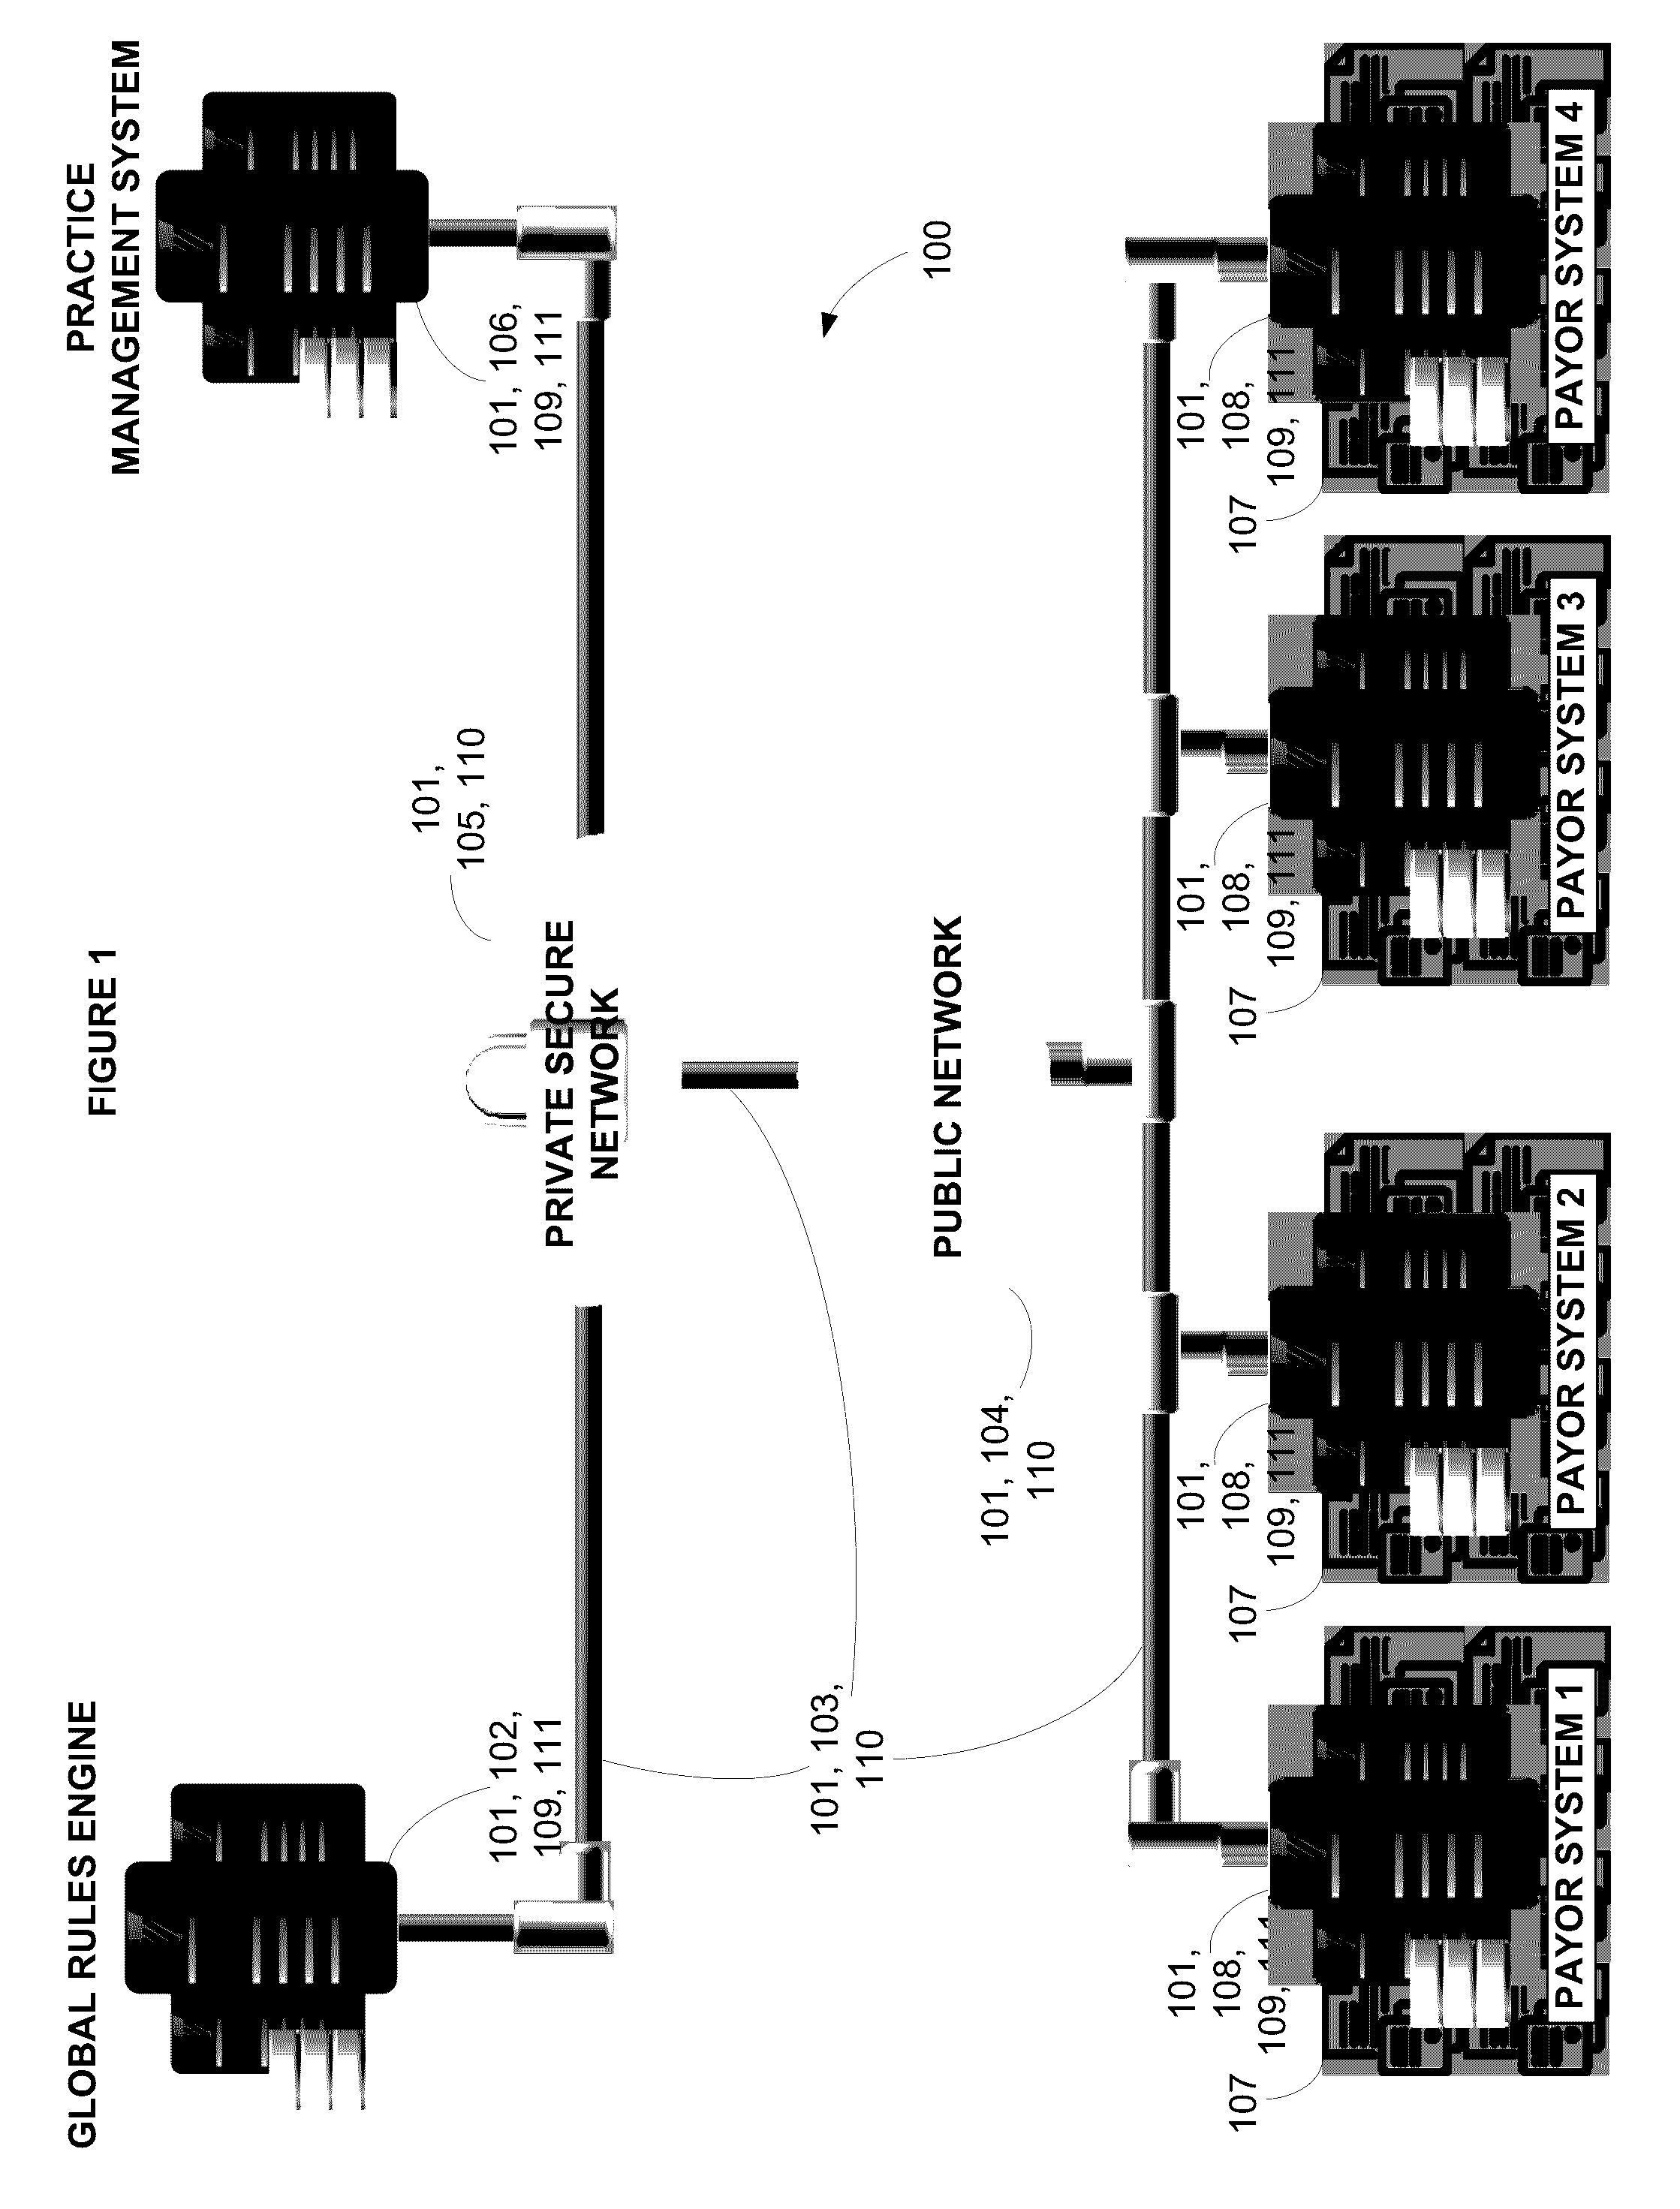 System and method for identifying and condensing similar and/or analogous information requests and/or responses